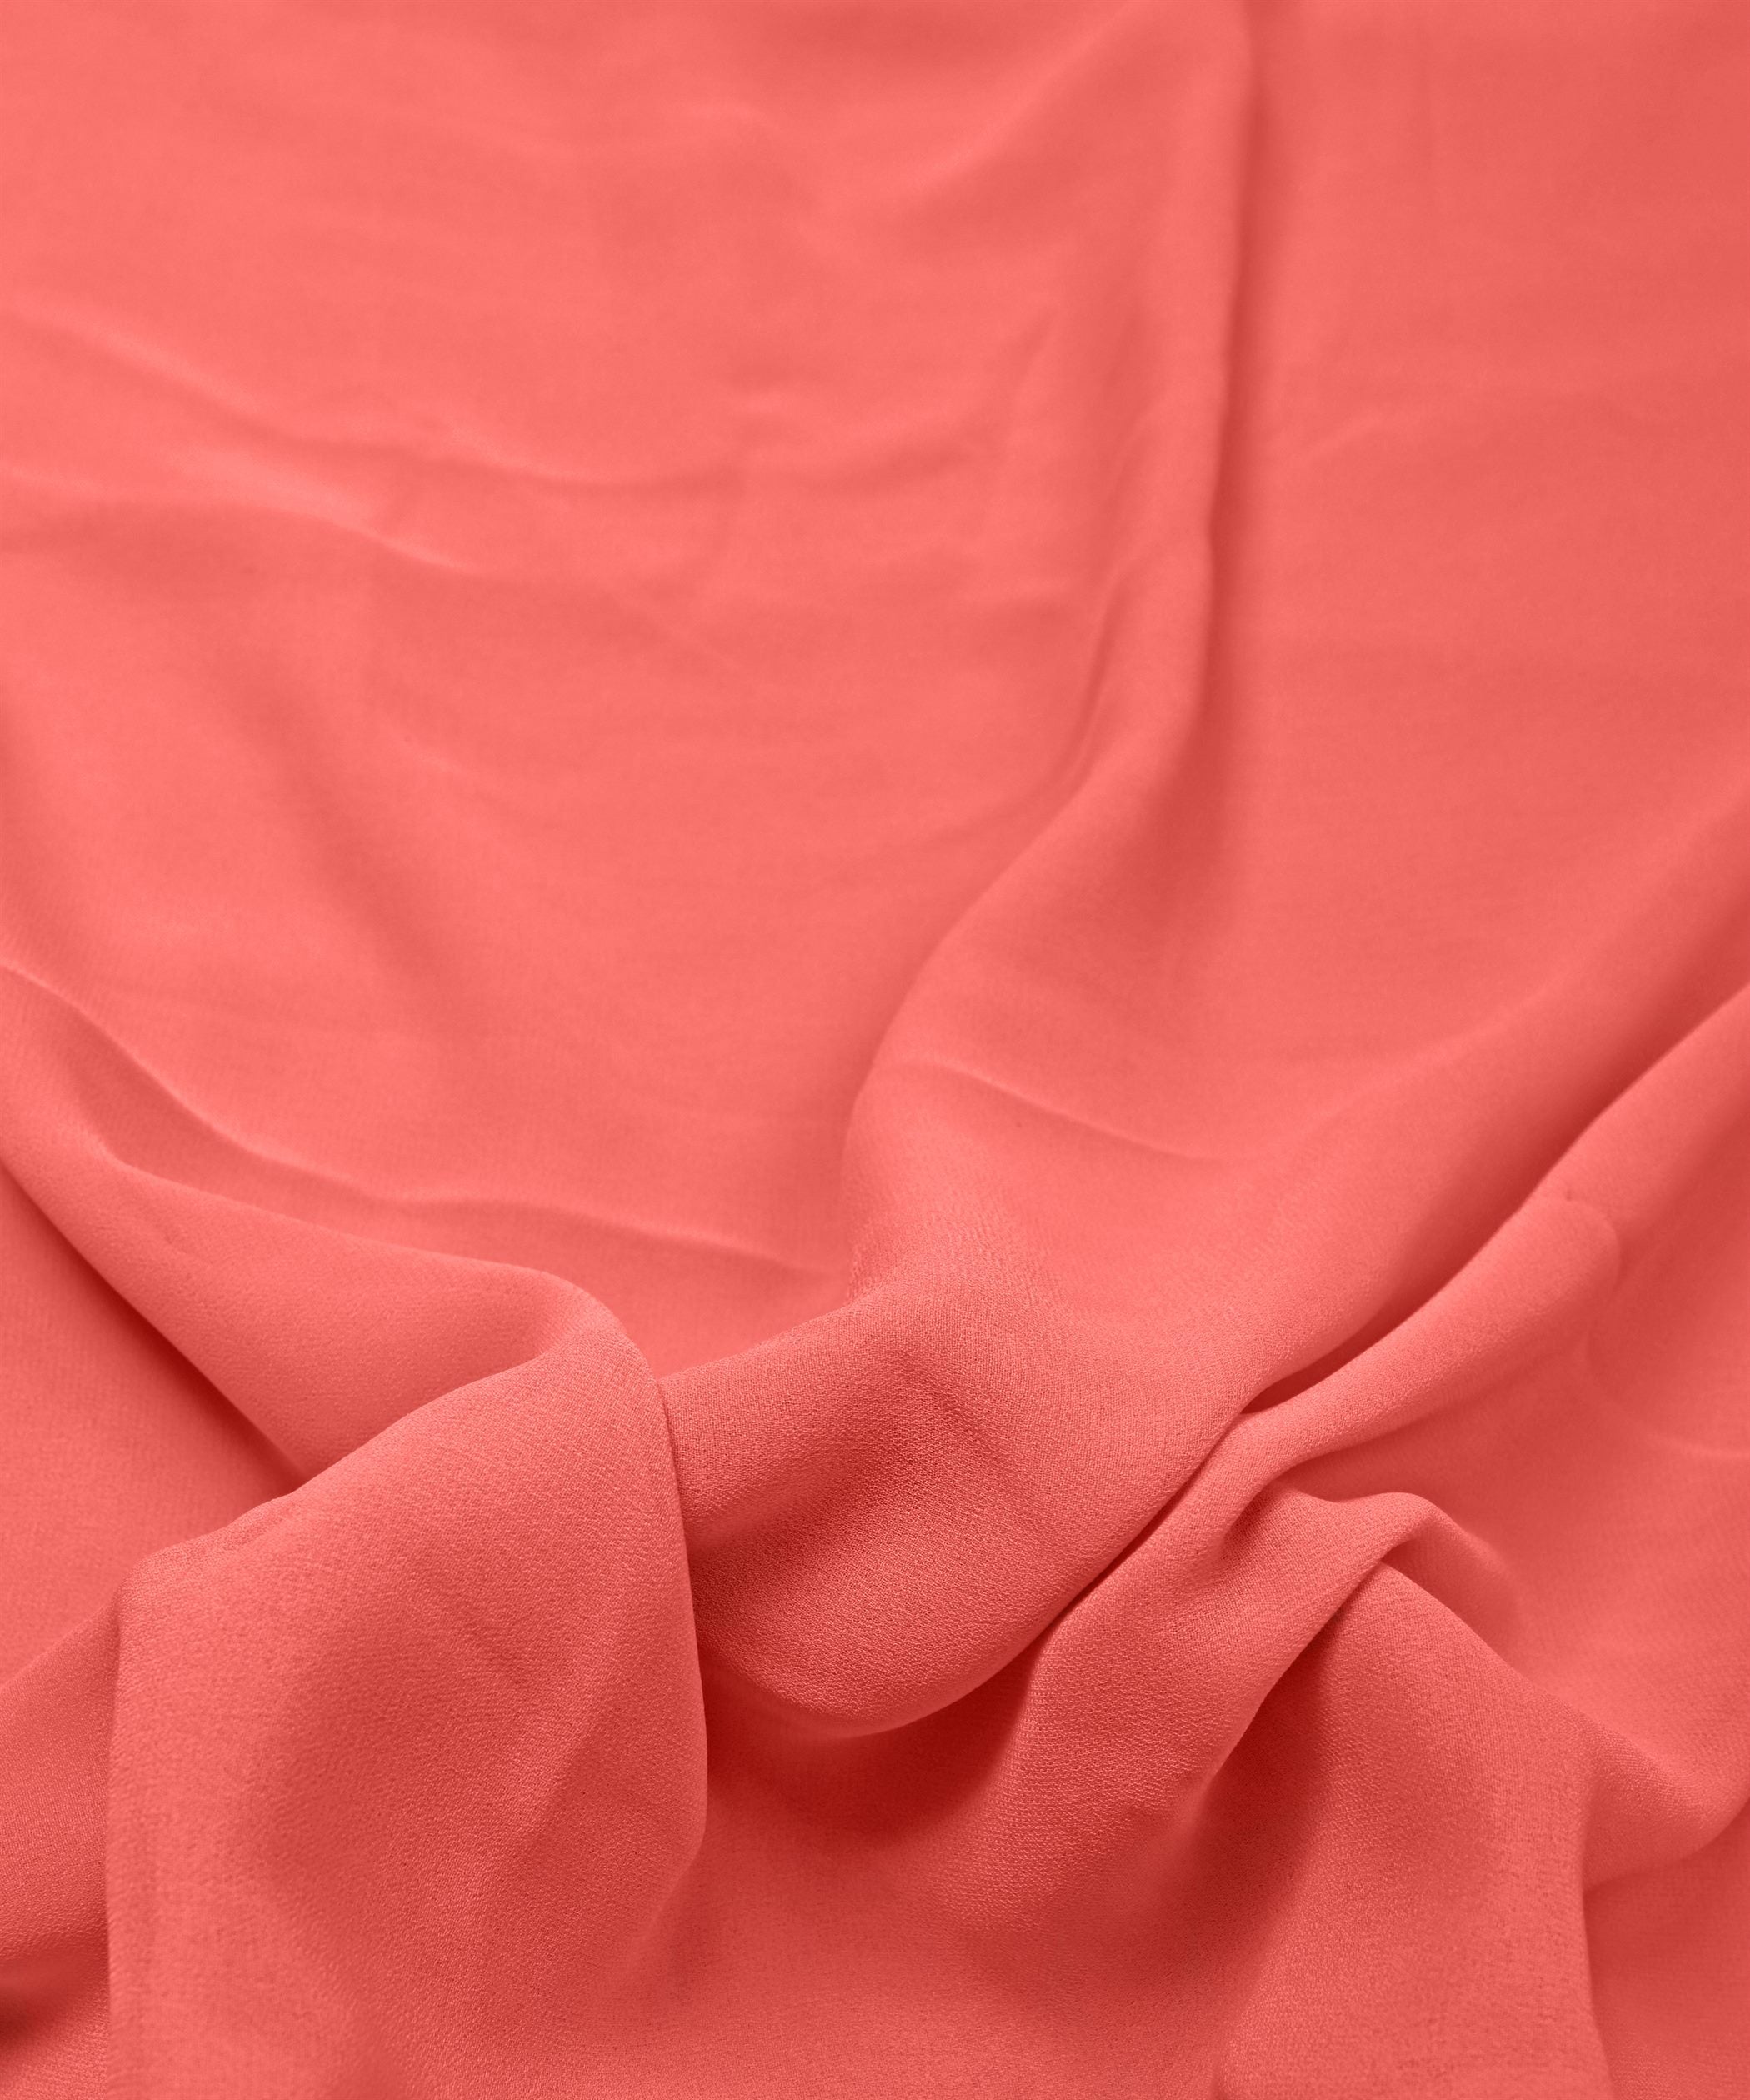 Coral Pink Plain Dyed Georgette (60 Grams) Fabric